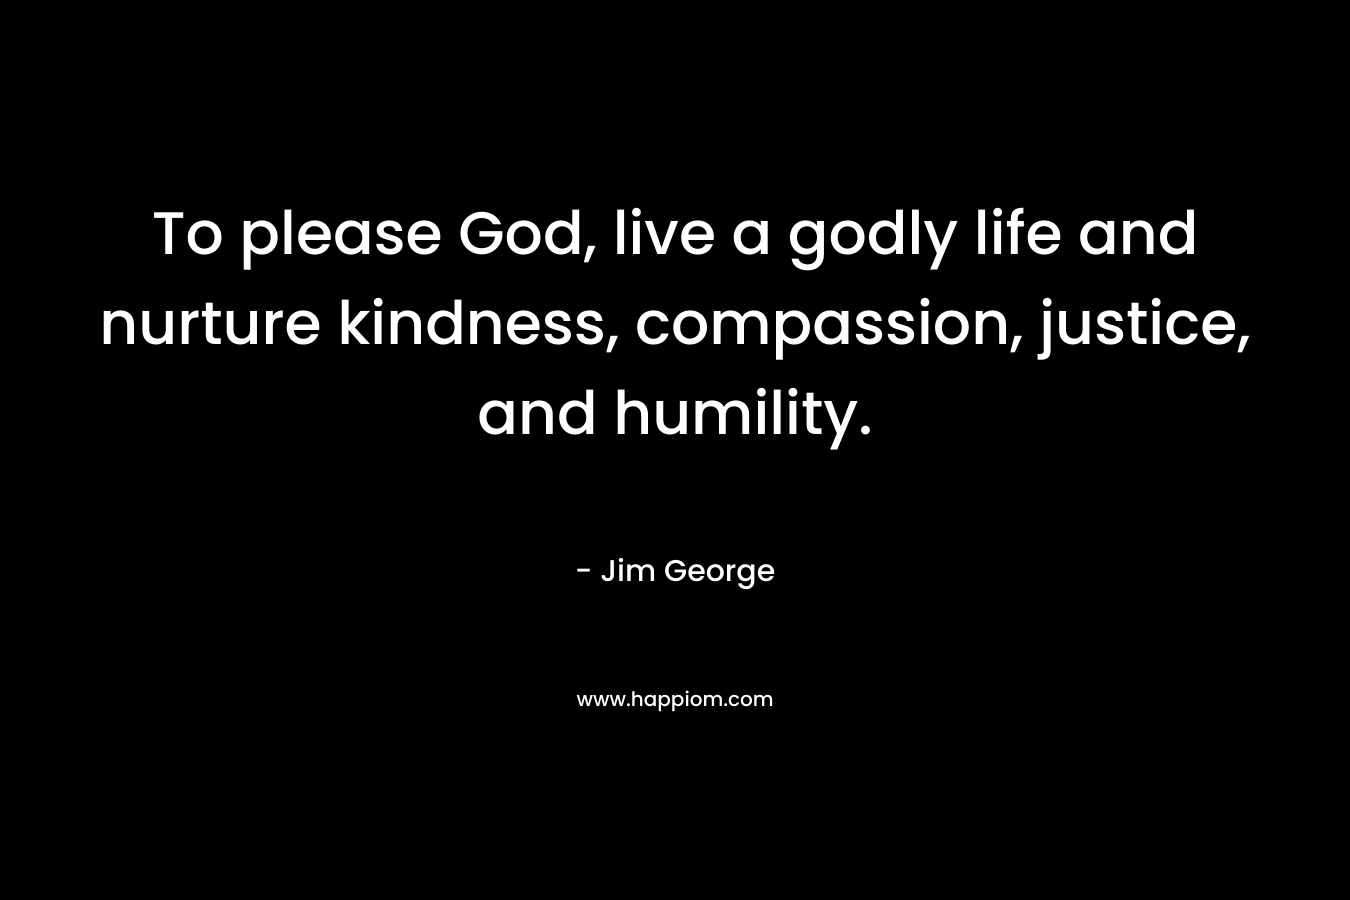 To please God, live a godly life and nurture kindness, compassion, justice, and humility.